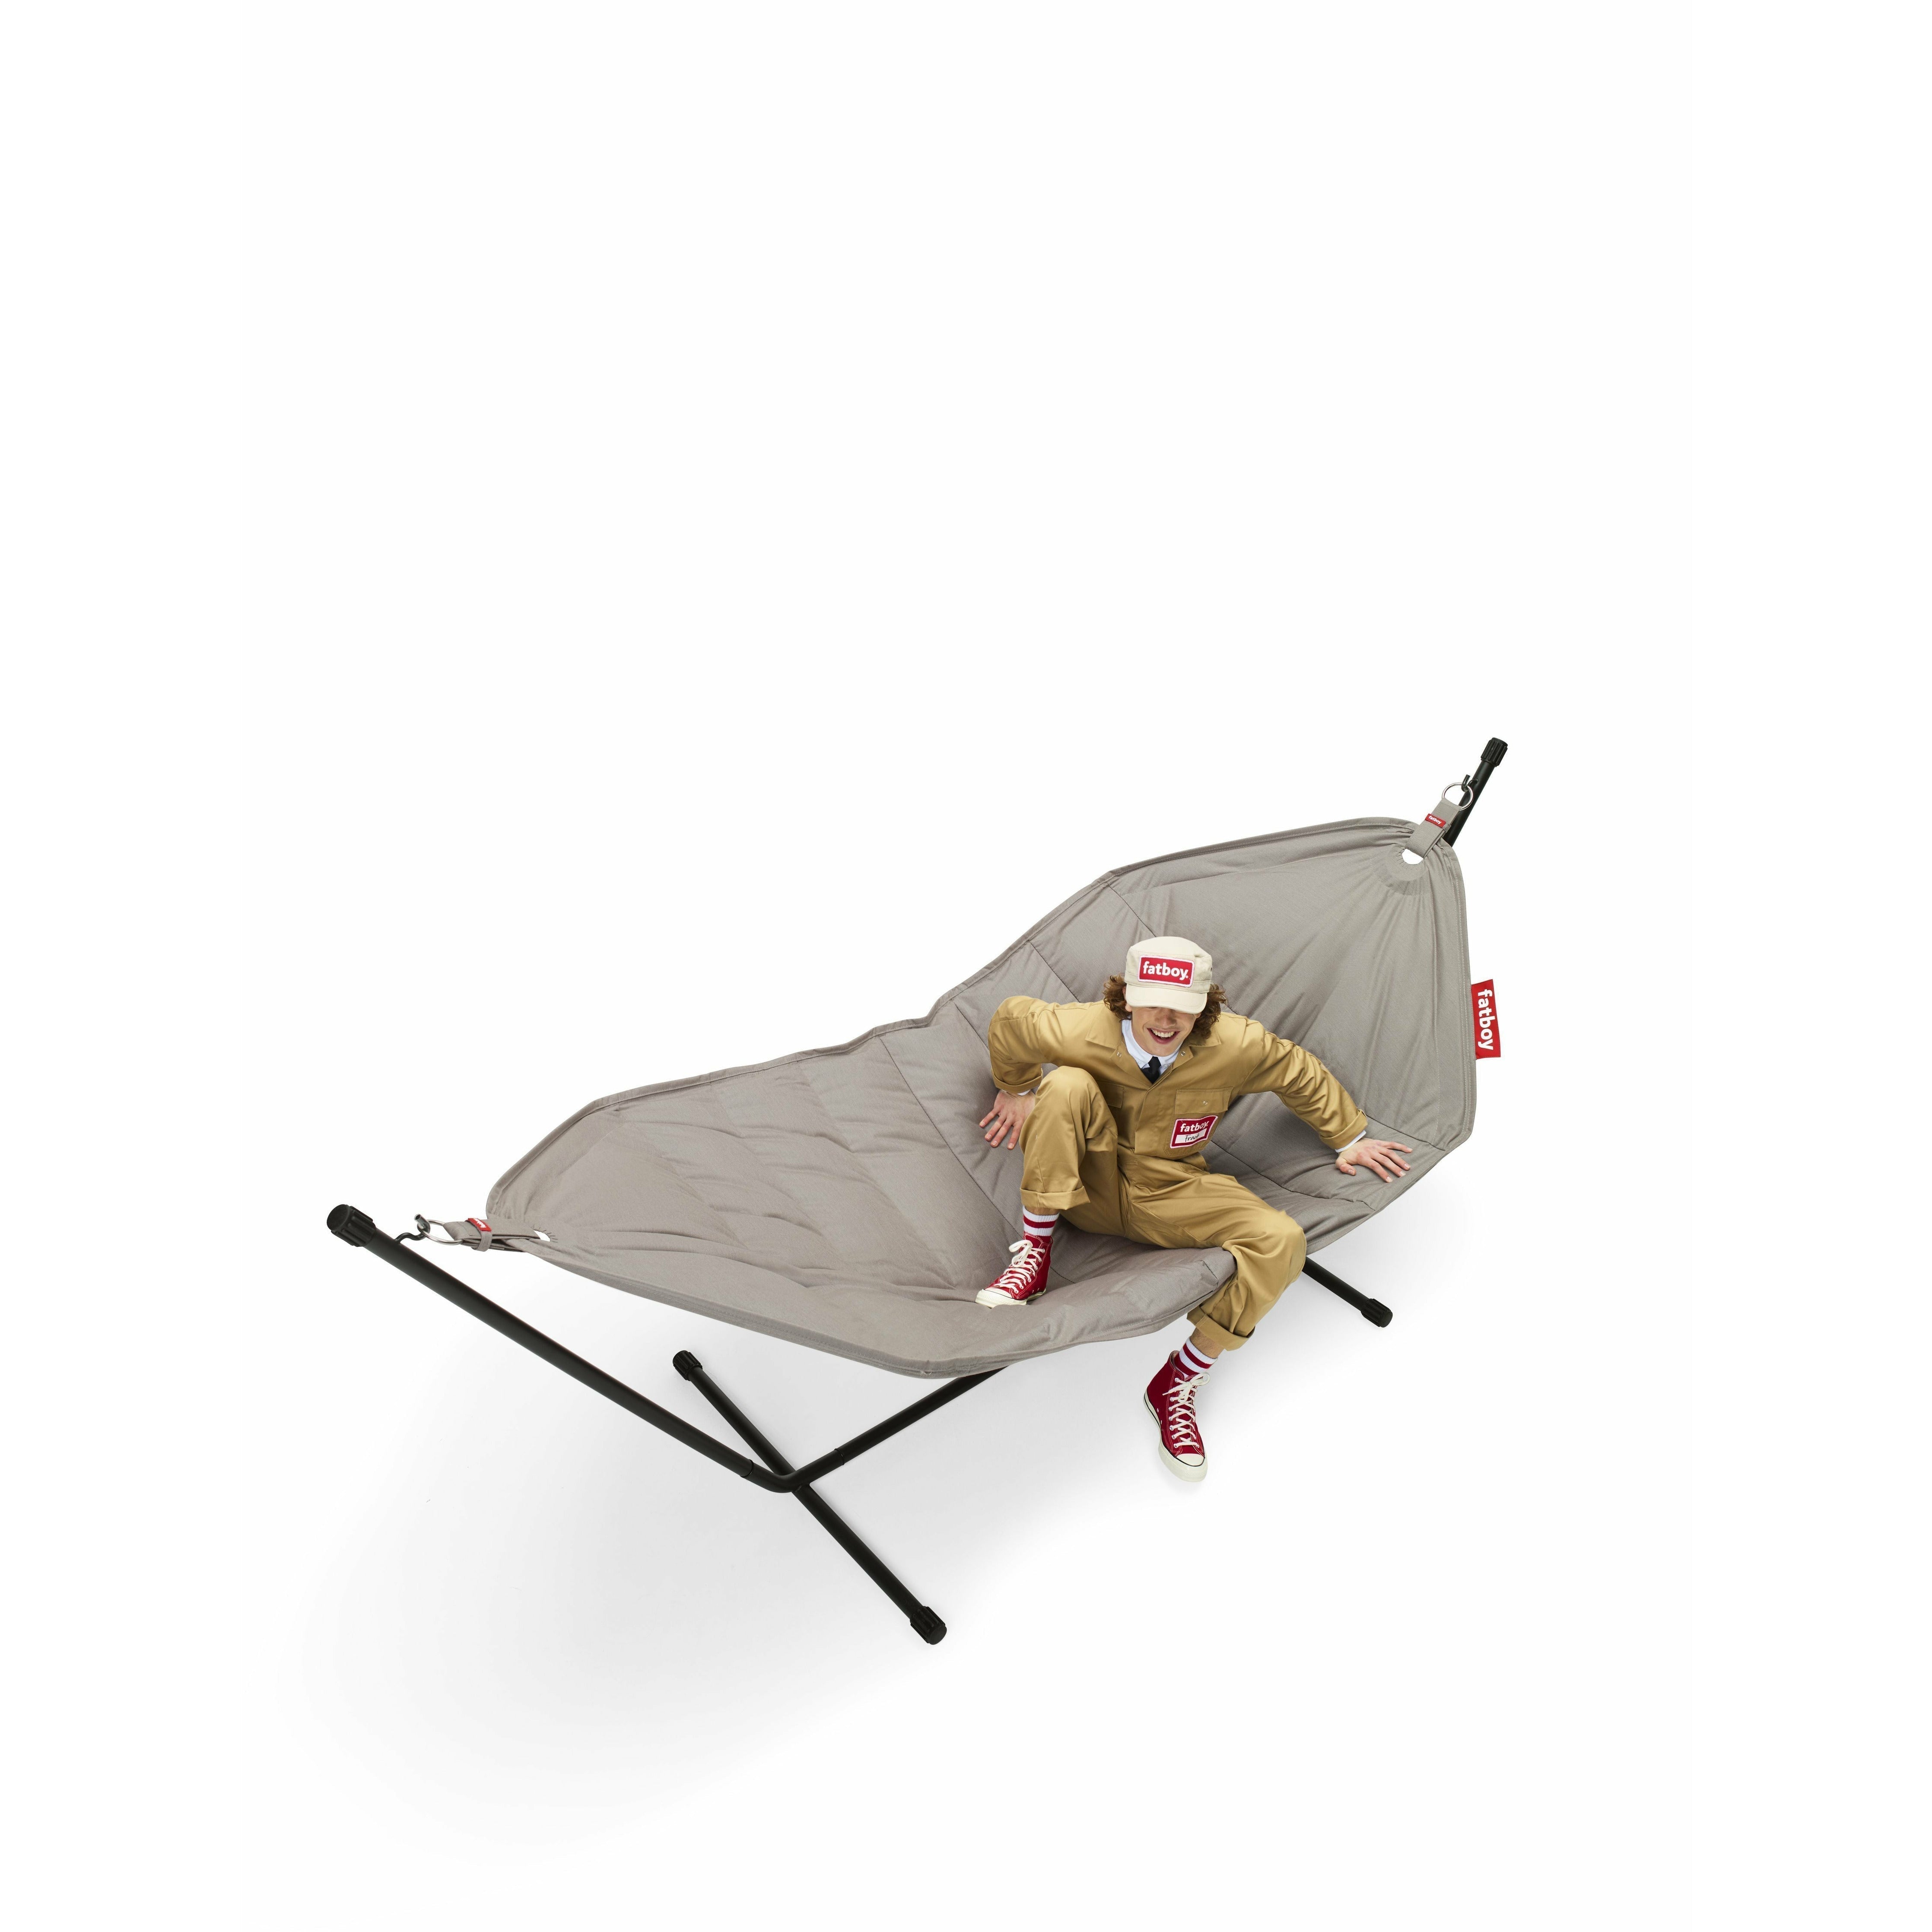 Fatboy Headdemock Superb Deluxe Hammock Incl. Frame, Cushion And Cover, Stone Grey